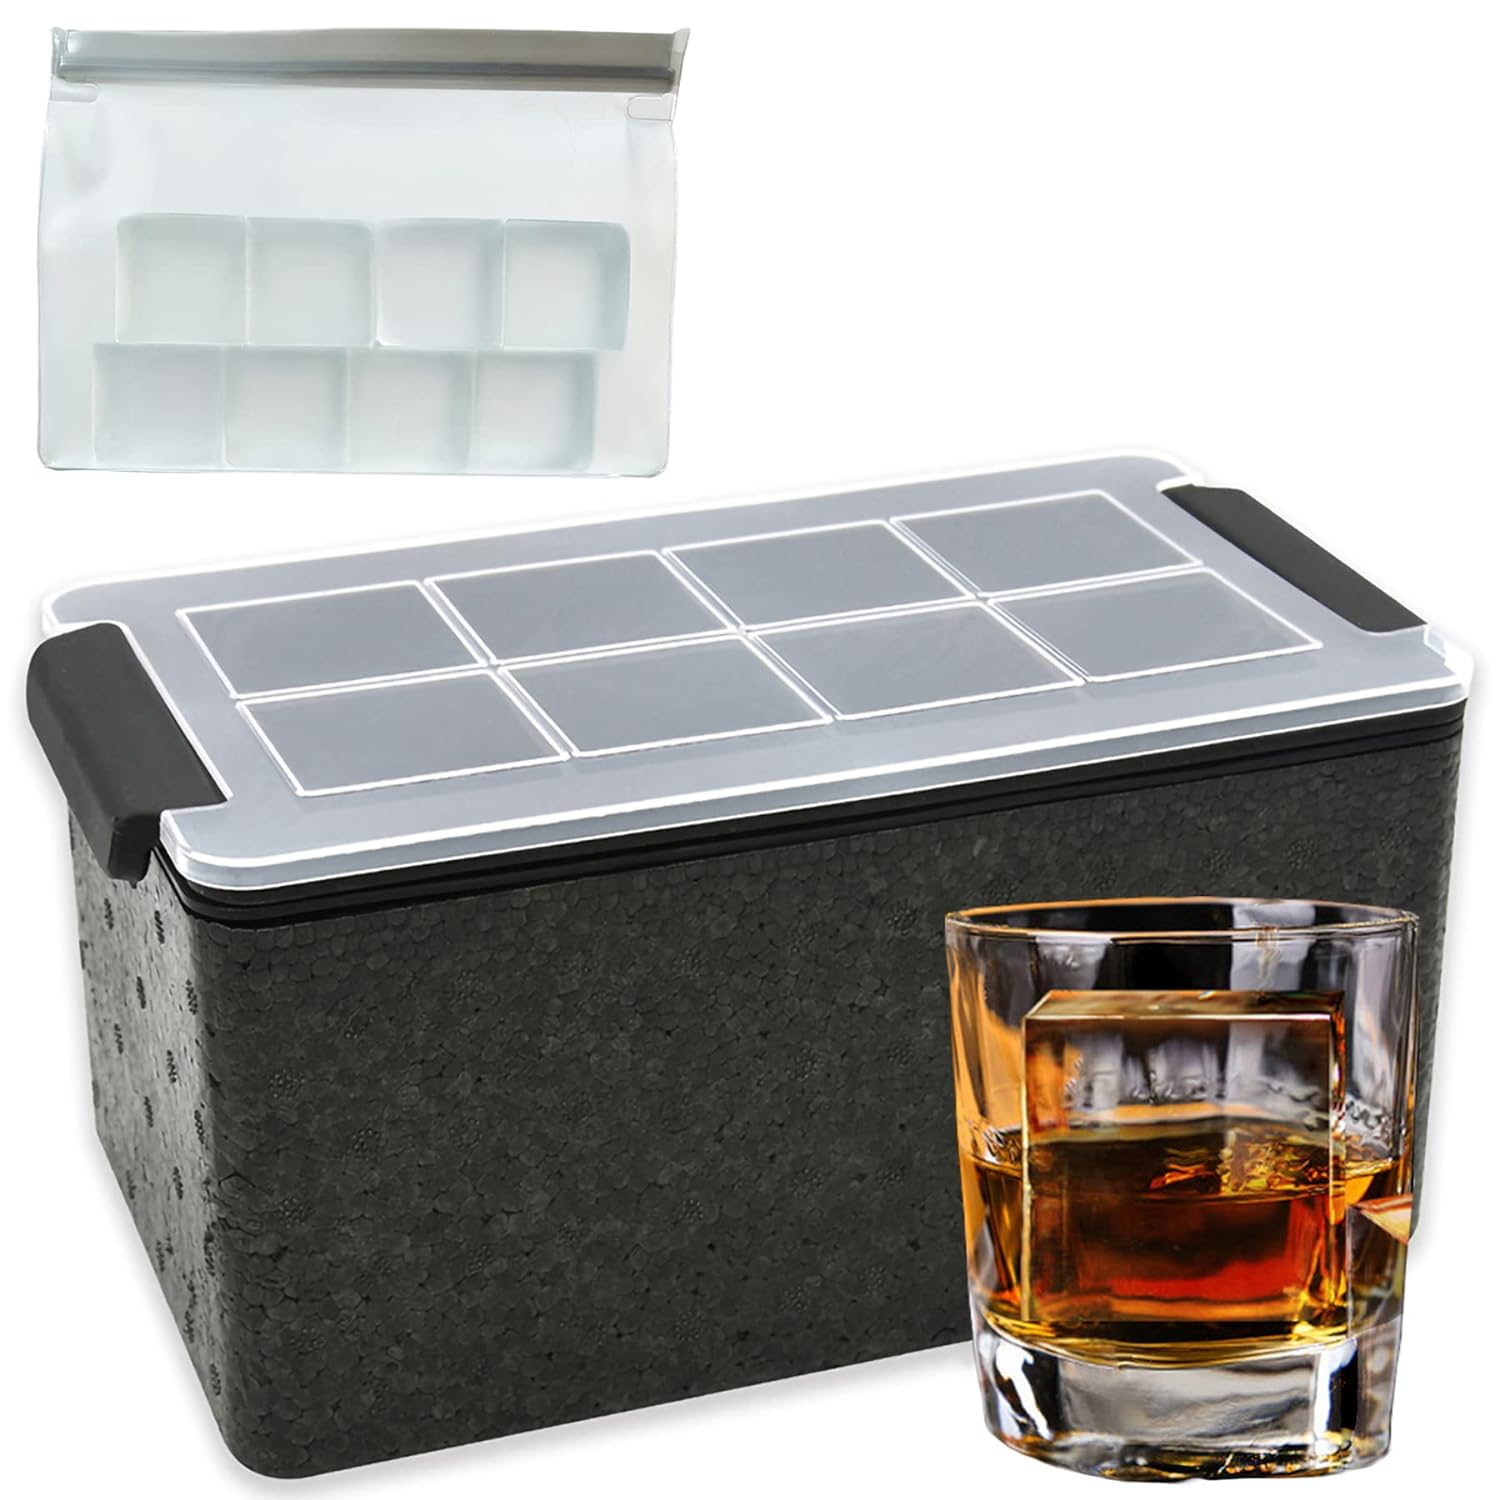 thinkstar Clear Ice Maker,Clear Ice Cube Mold With Lid,2 Inch Clear Ice Cube Maker With Reusable Storage Bag,Silicone Clear Ice Cube …